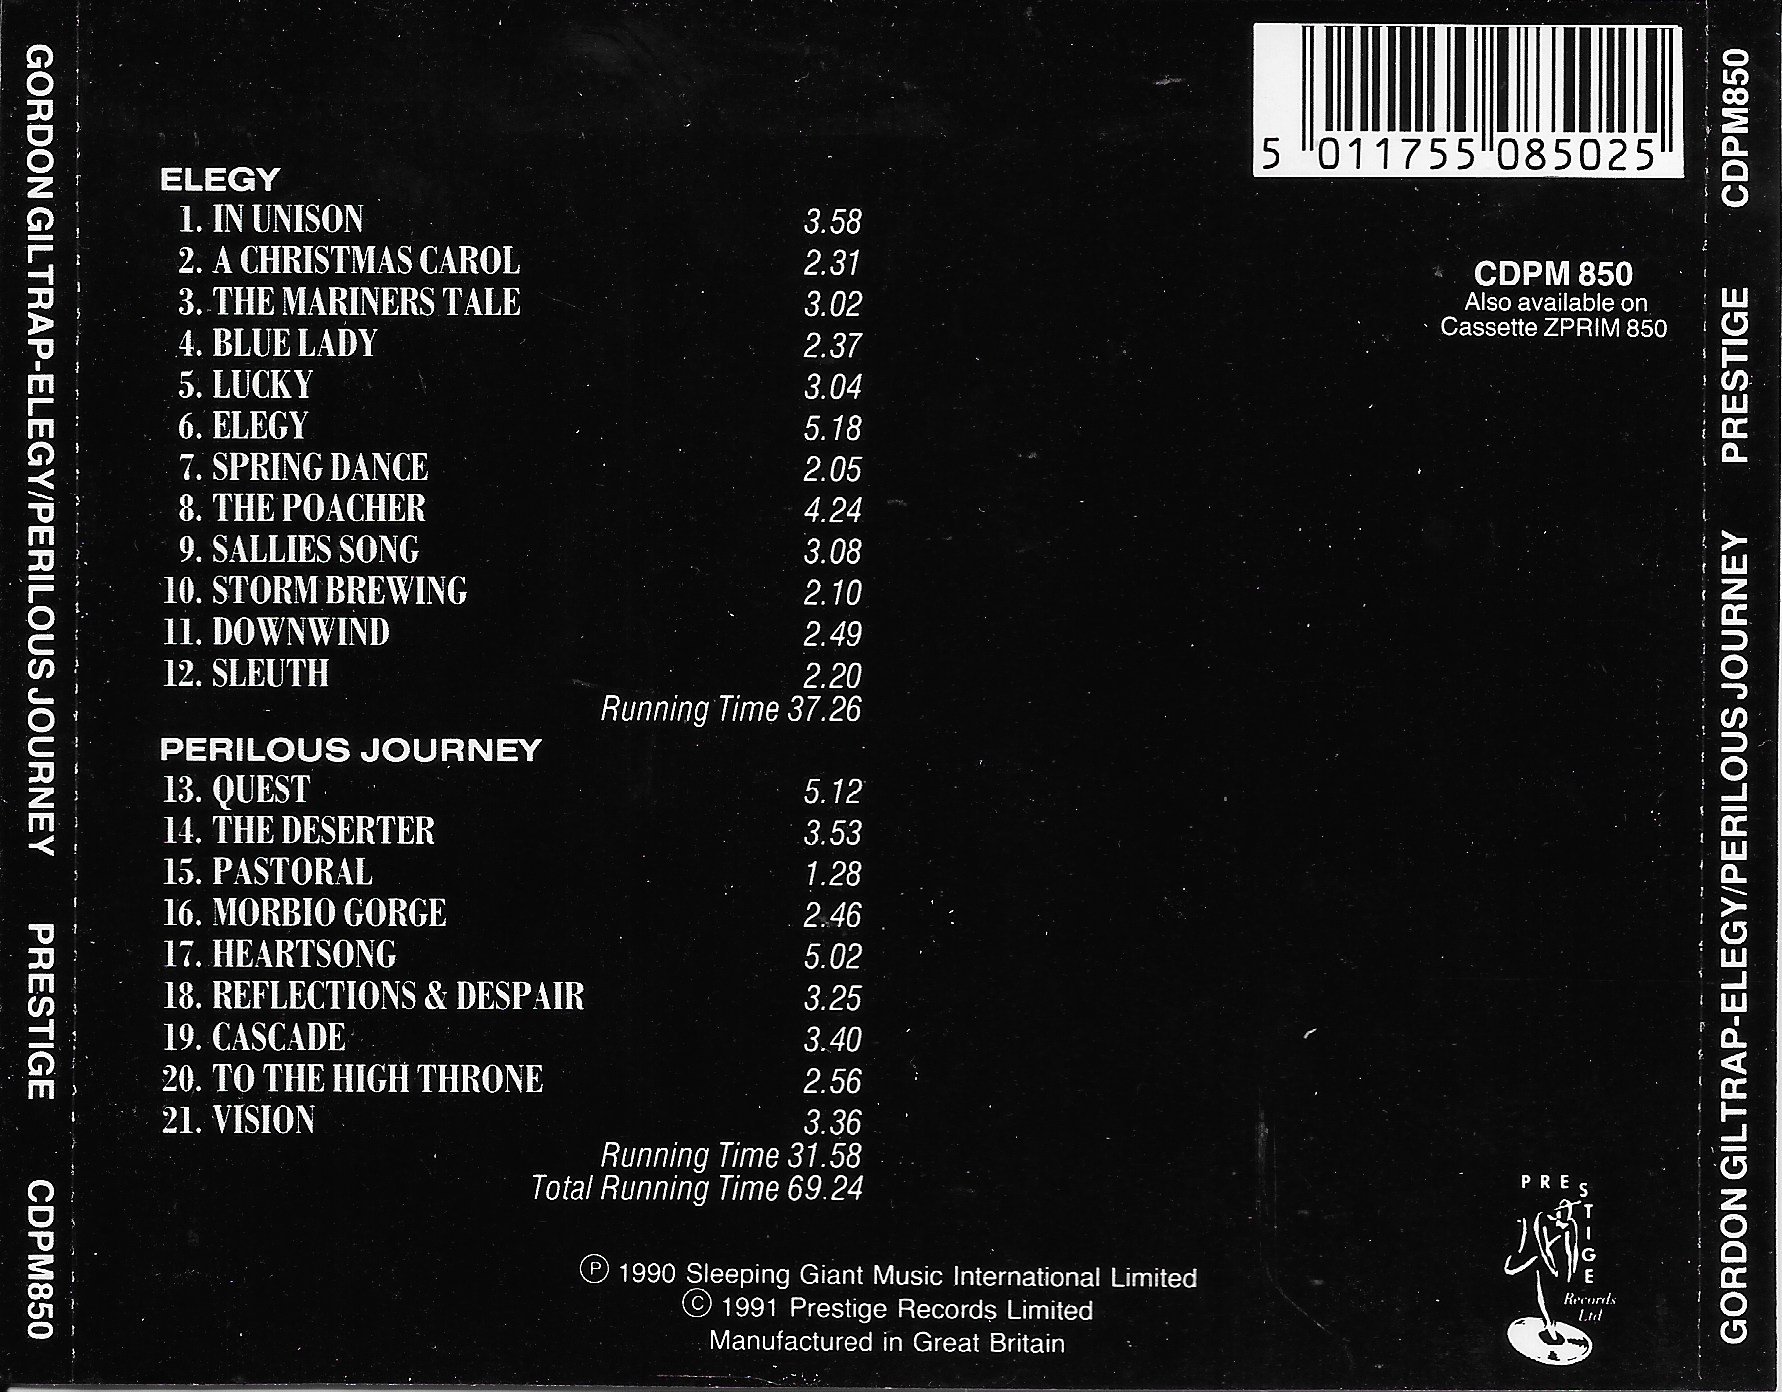 Back cover of CDPM 850